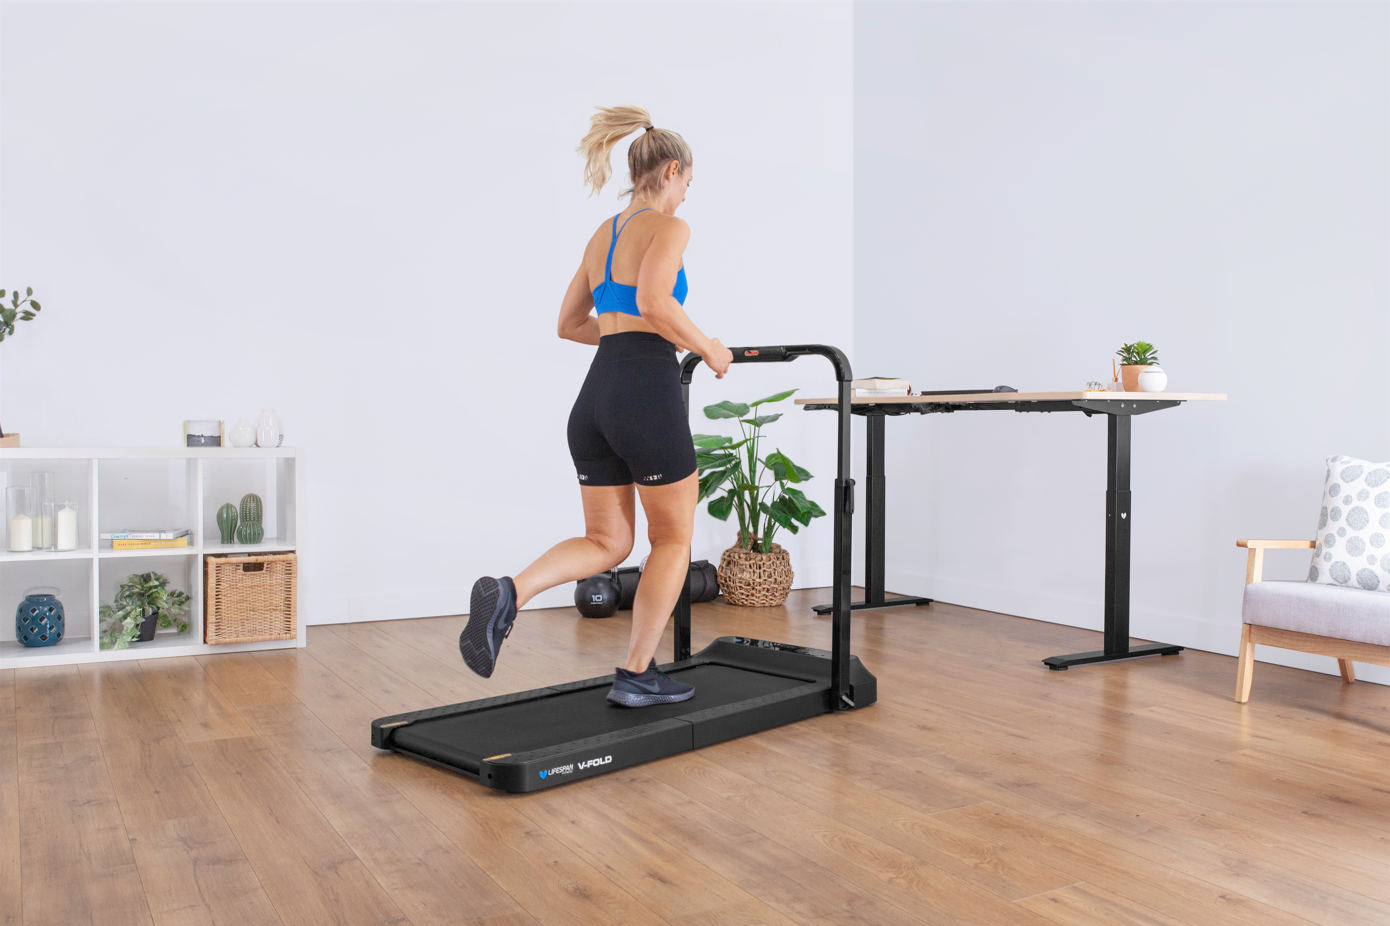 Is Treadmill Speed the Same as Real Speed?